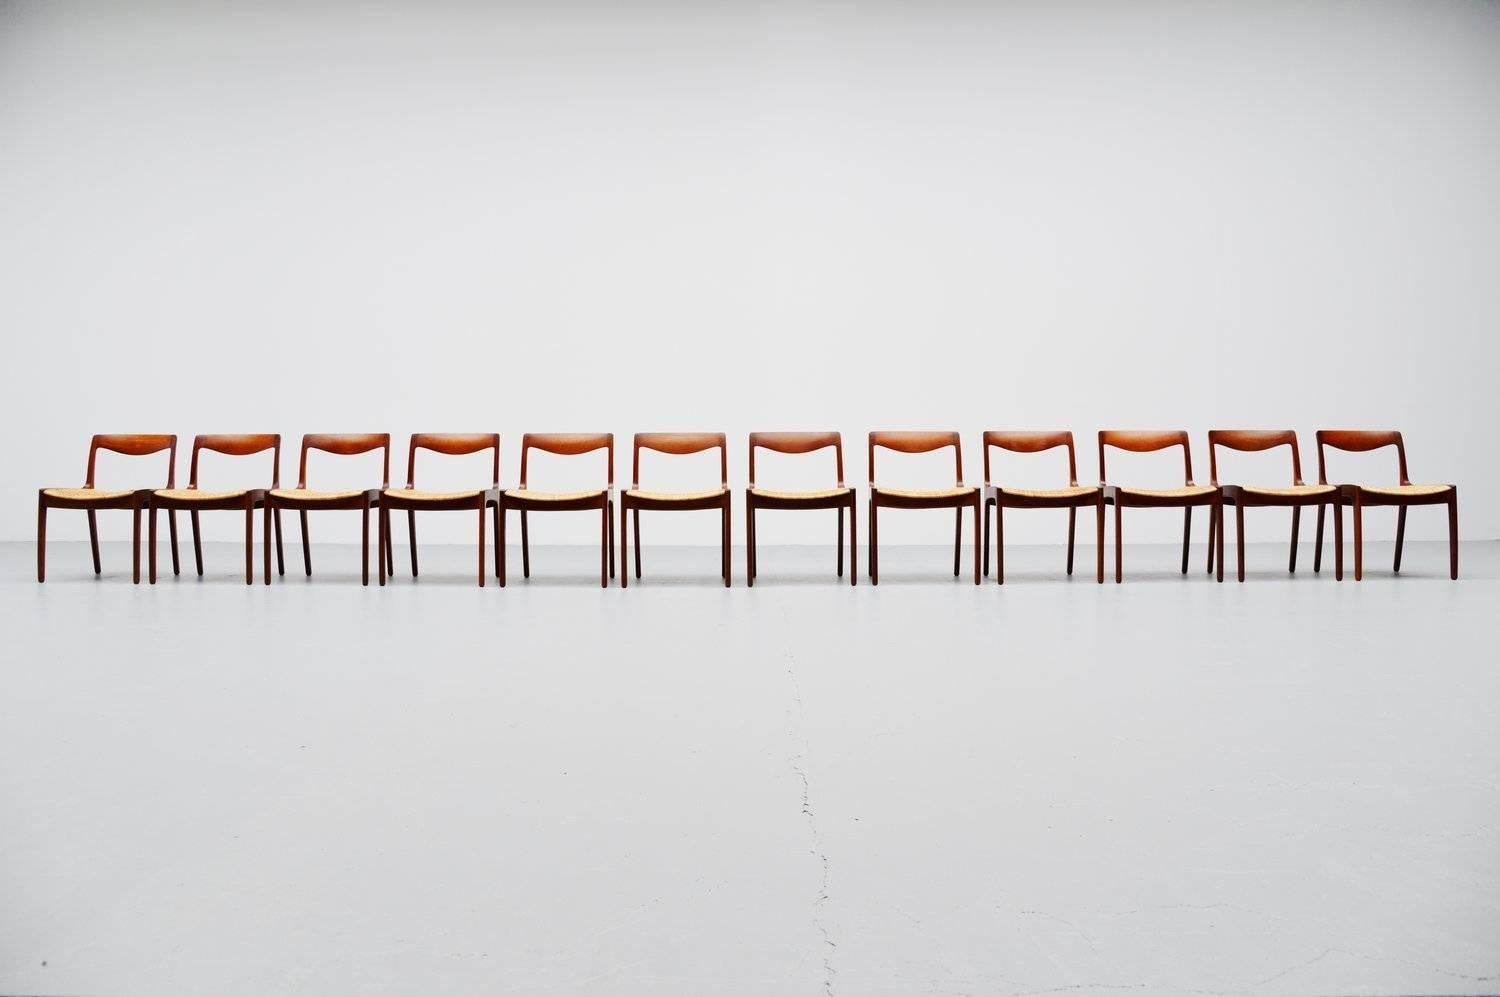 Superb set of 12 dining chairs designed by Vilhelm Wohlert for Poul Jeppesen, Denmark, 1958. These chairs are made of solid sculpted teak wood and have finger joinery and organic backrest. The seats are made of cane which is a great contrast with